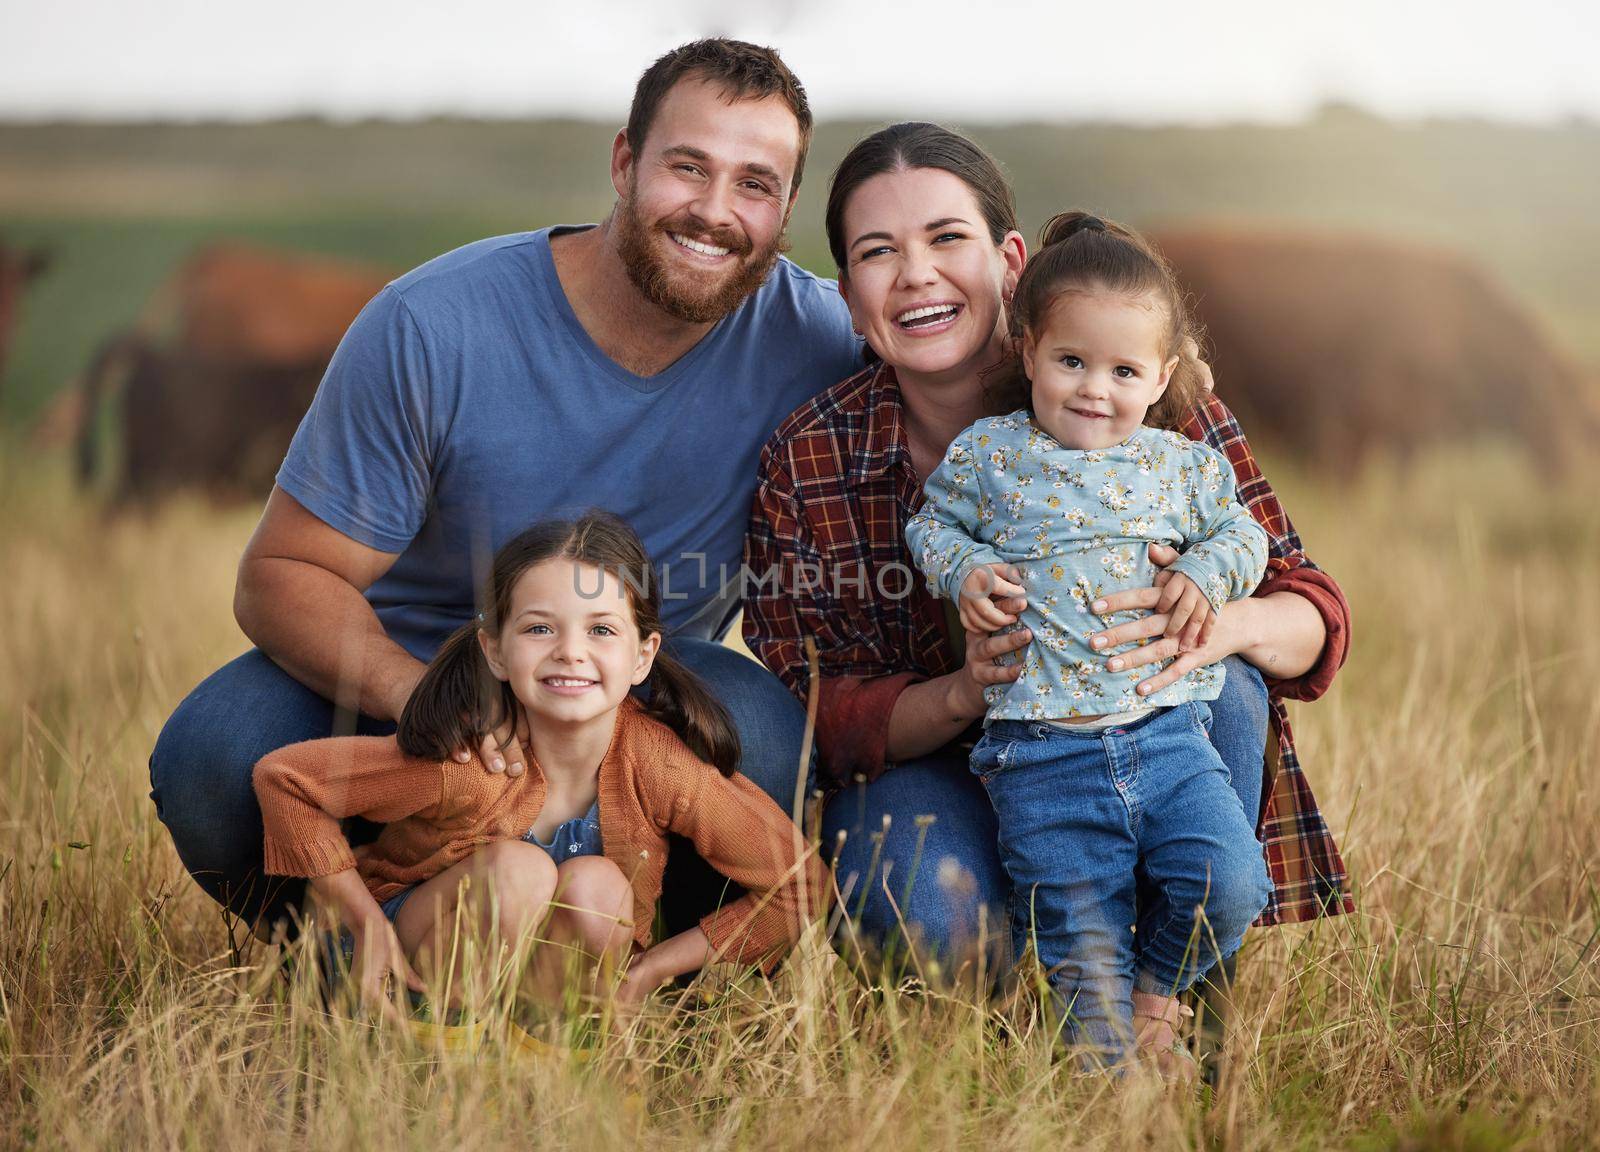 Portrait of happy family on a countryside farm field with cows in the background. Farmer parents bonding with kids on a sustainable agriculture cattle business with a smile and happiness together by YuriArcurs